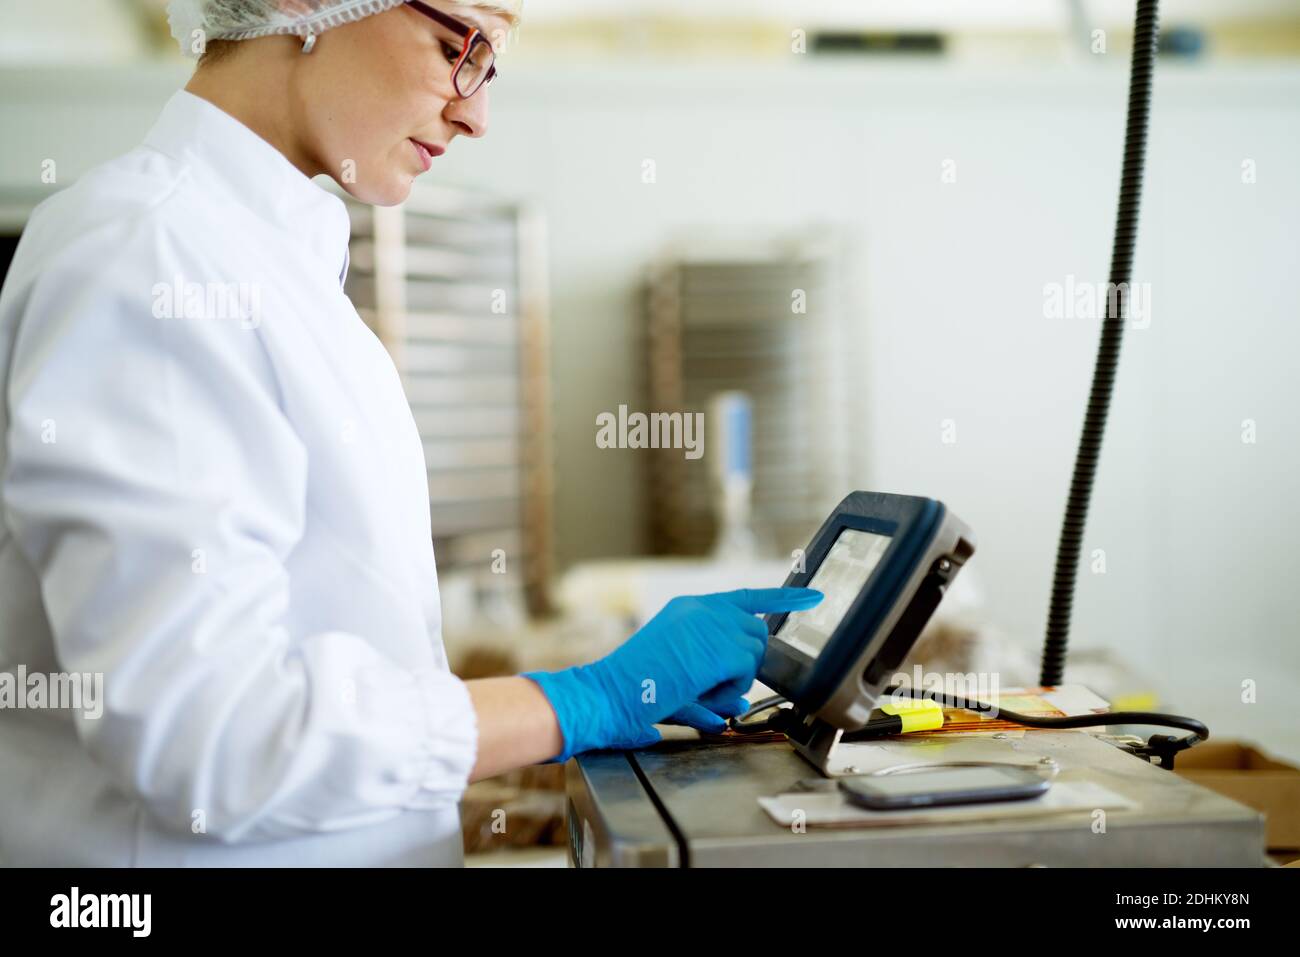 Young focused female worker in sterile cloths using a complex machinery in factory production line. Stock Photo